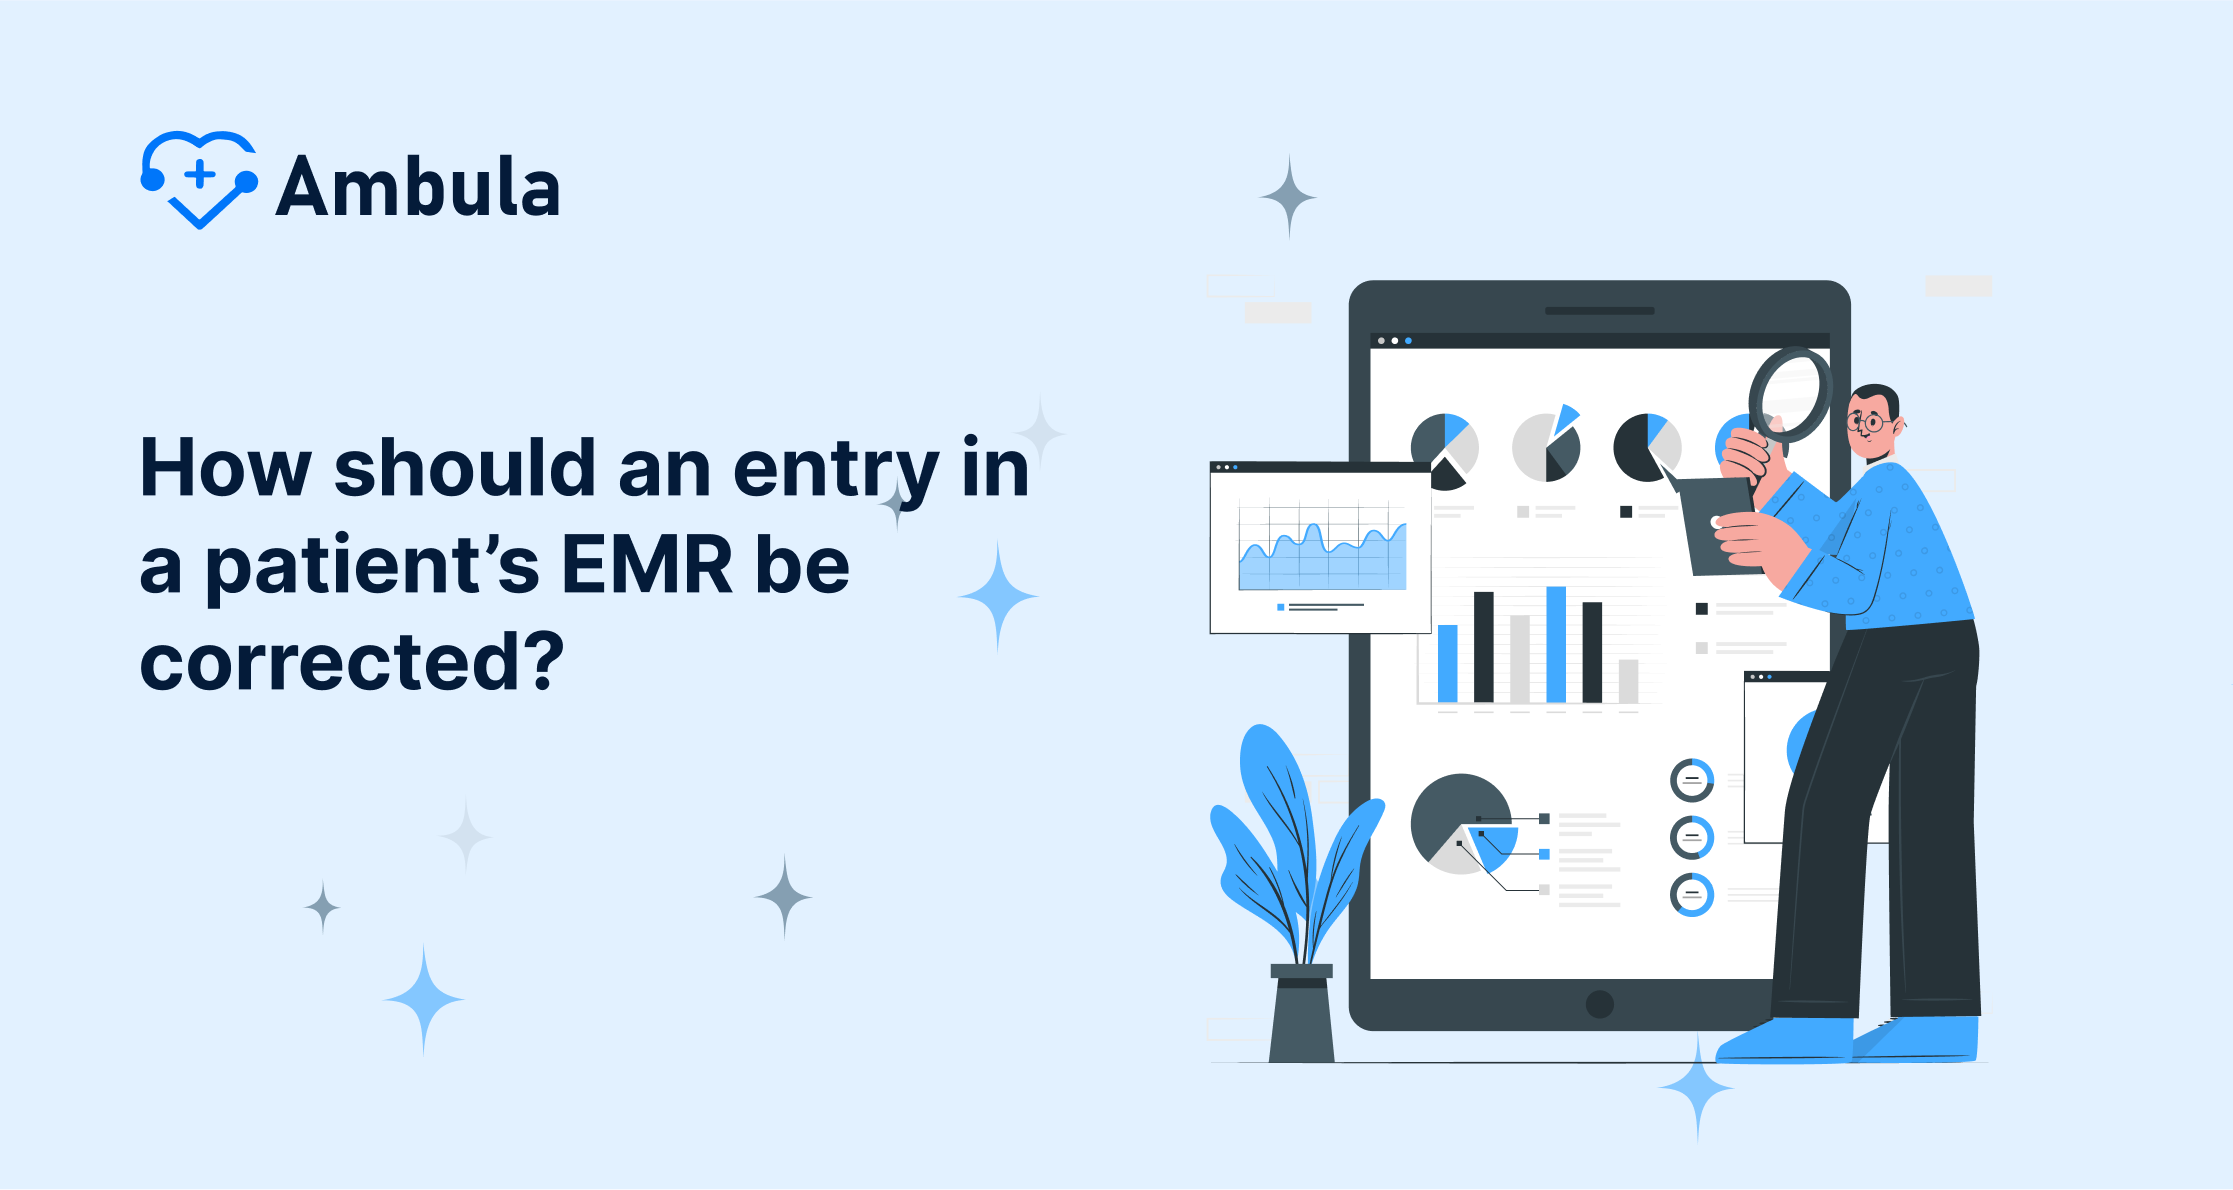 How should an entry in a patient’s EMR be corrected?